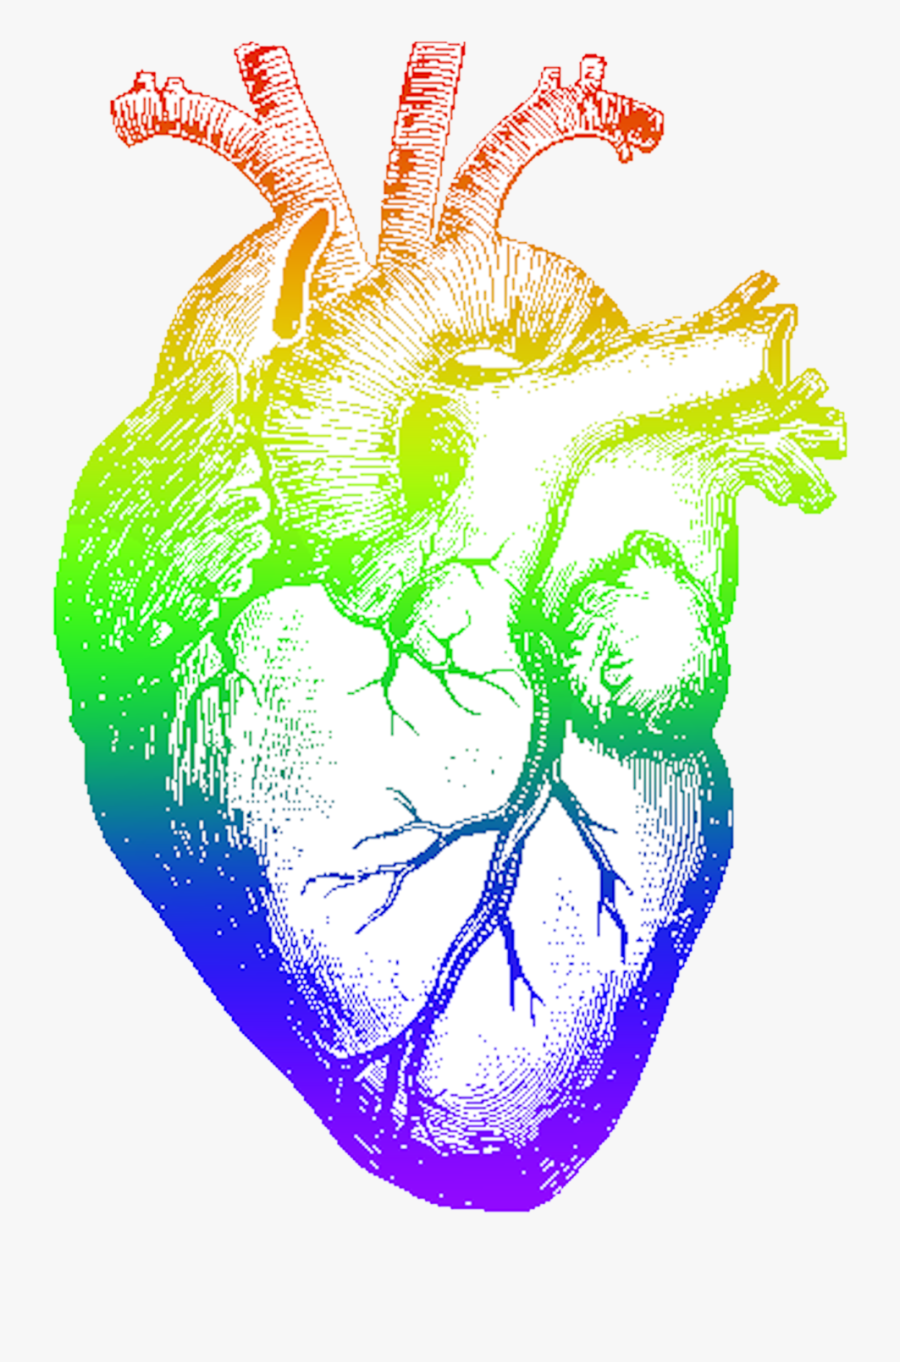 Rainbow Heart Png - Human Heart Drawings In Pencil, Transparent Clipart